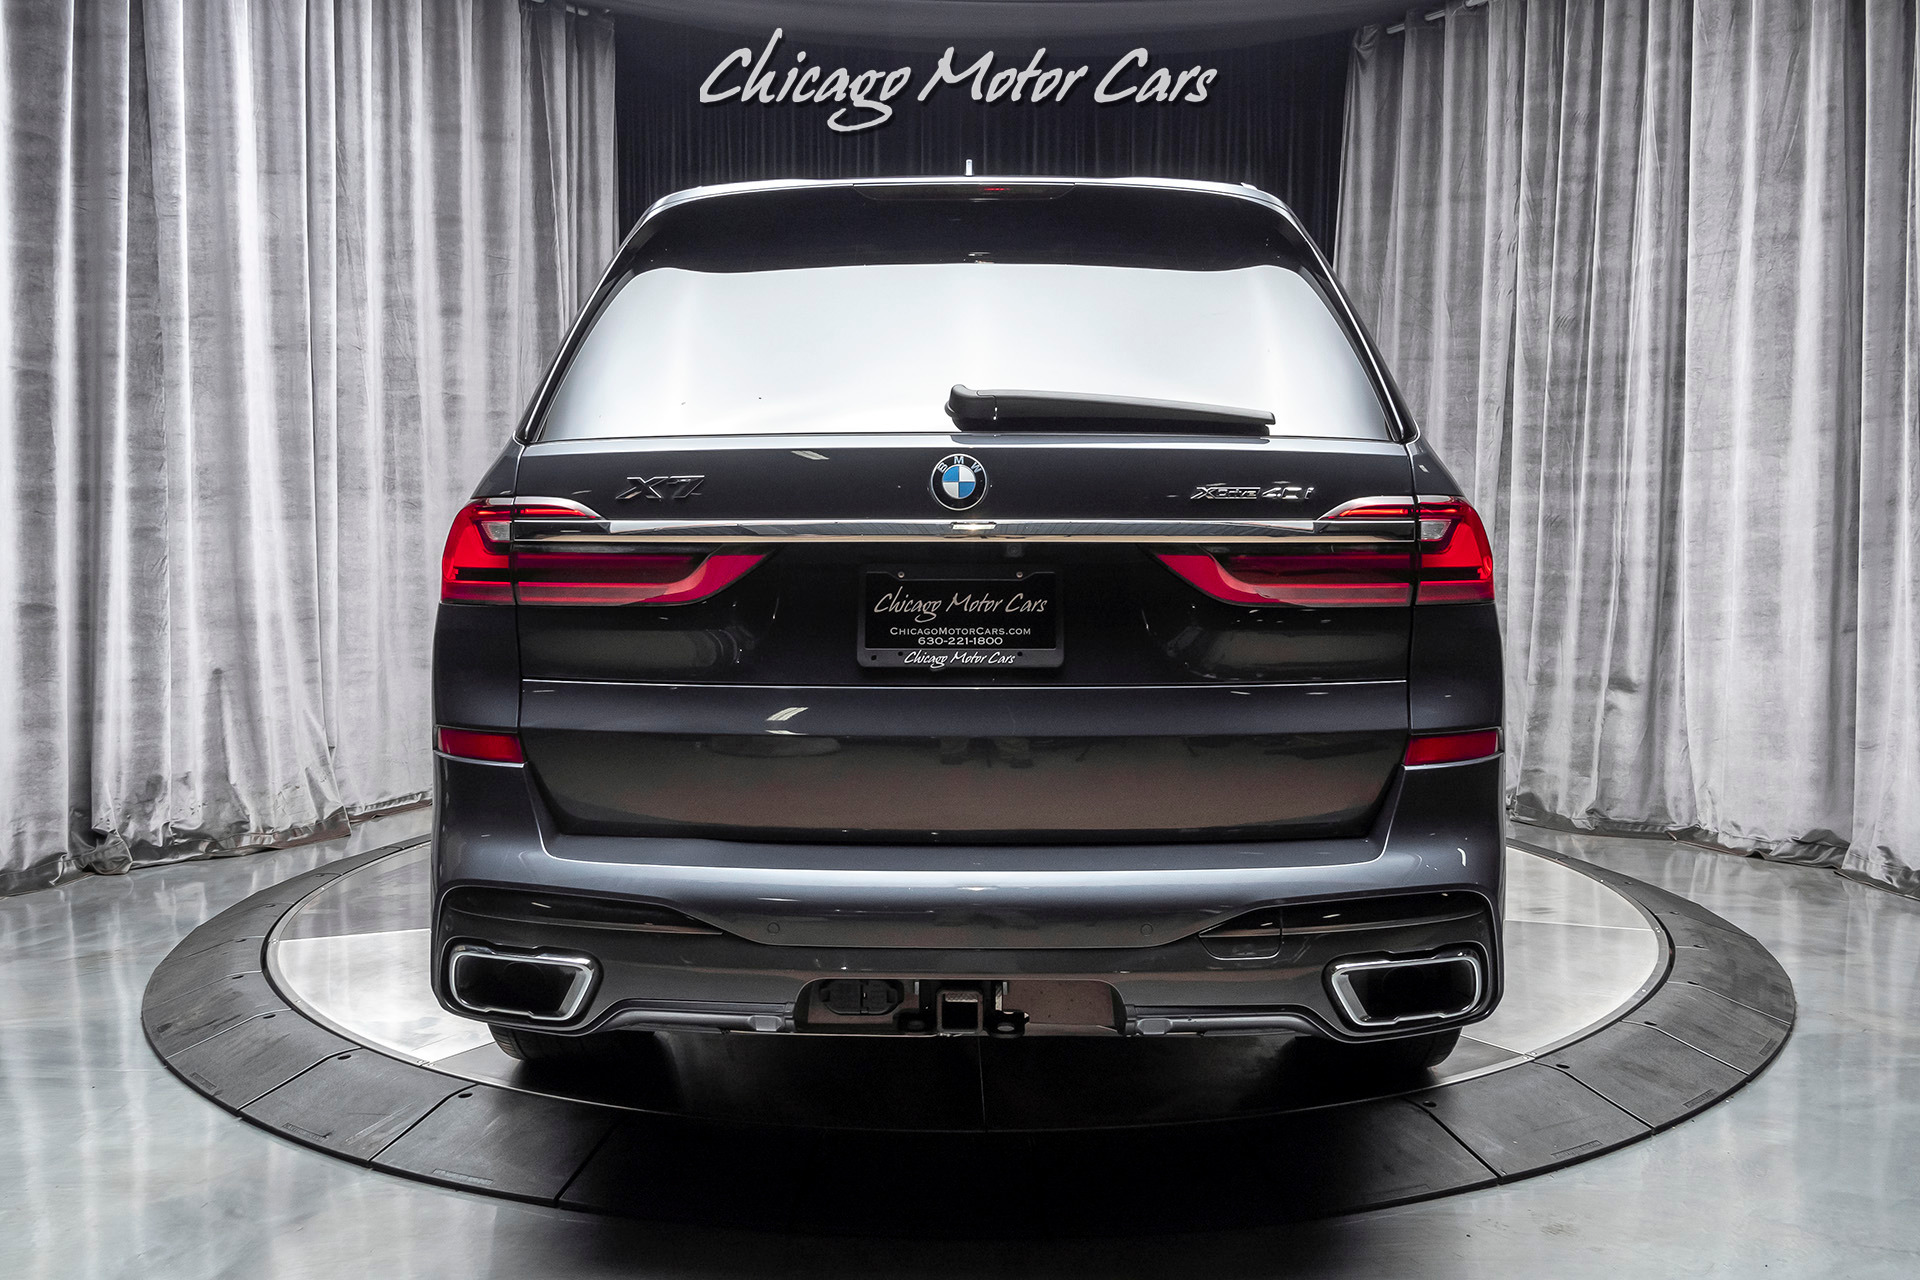 Used-2019-BMW-X7-xDrive40i-M-Sport-Package-MSRP-89995-LOADED-PREMIUM-PACKAGE